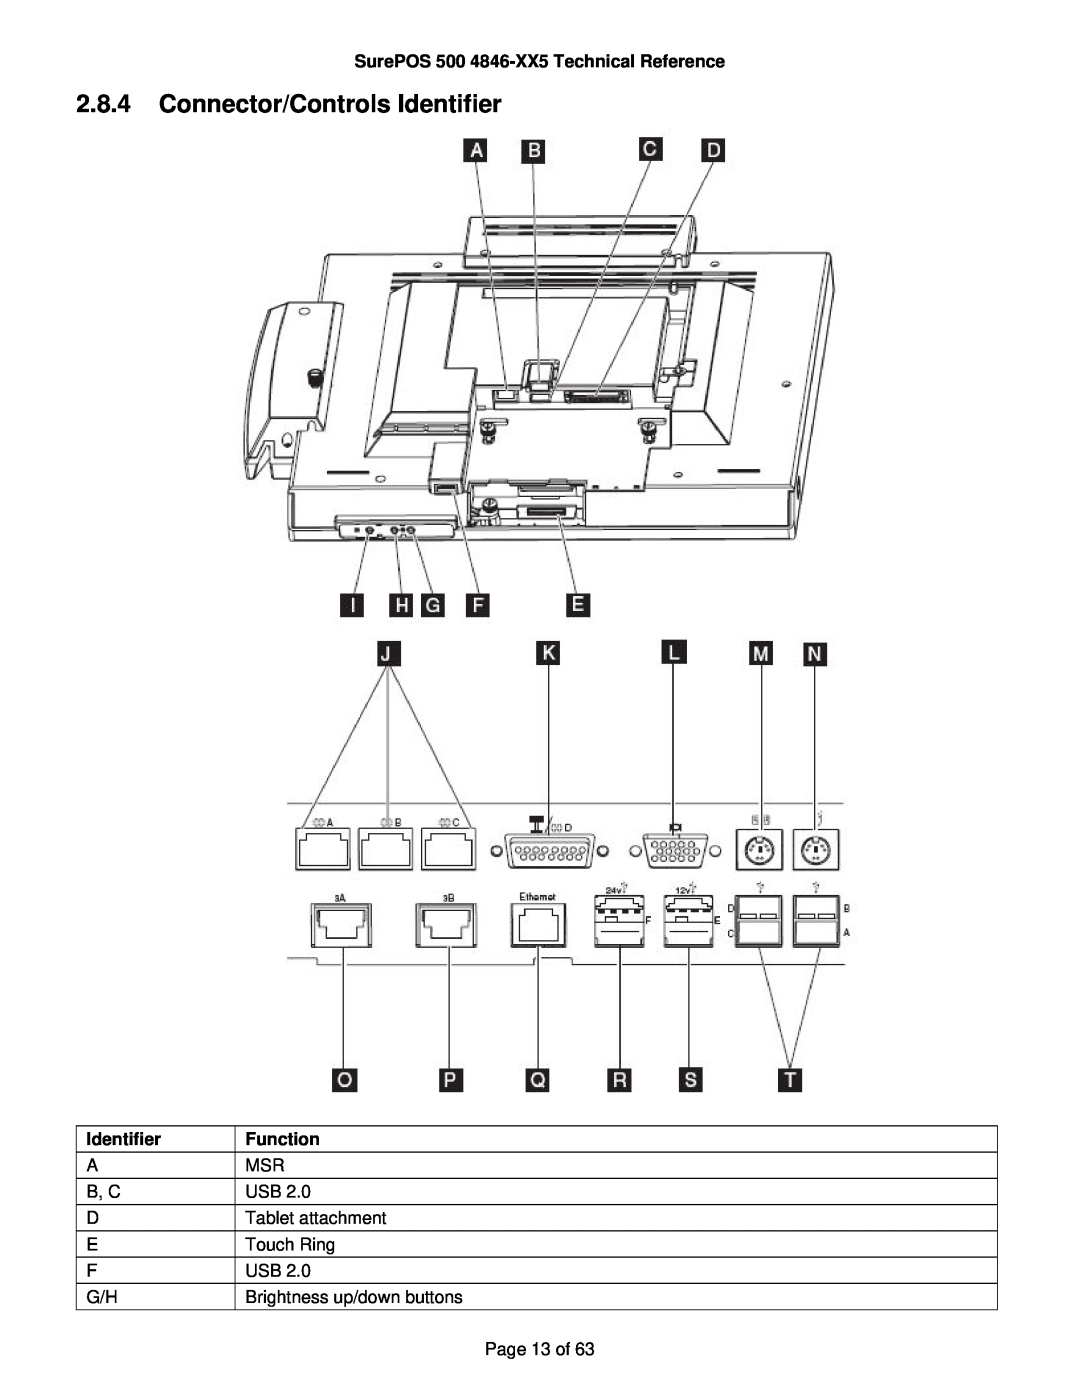 IBM 500 manual Connector/Controls Identifier, A B, C D E F G/H, Page 13 of 